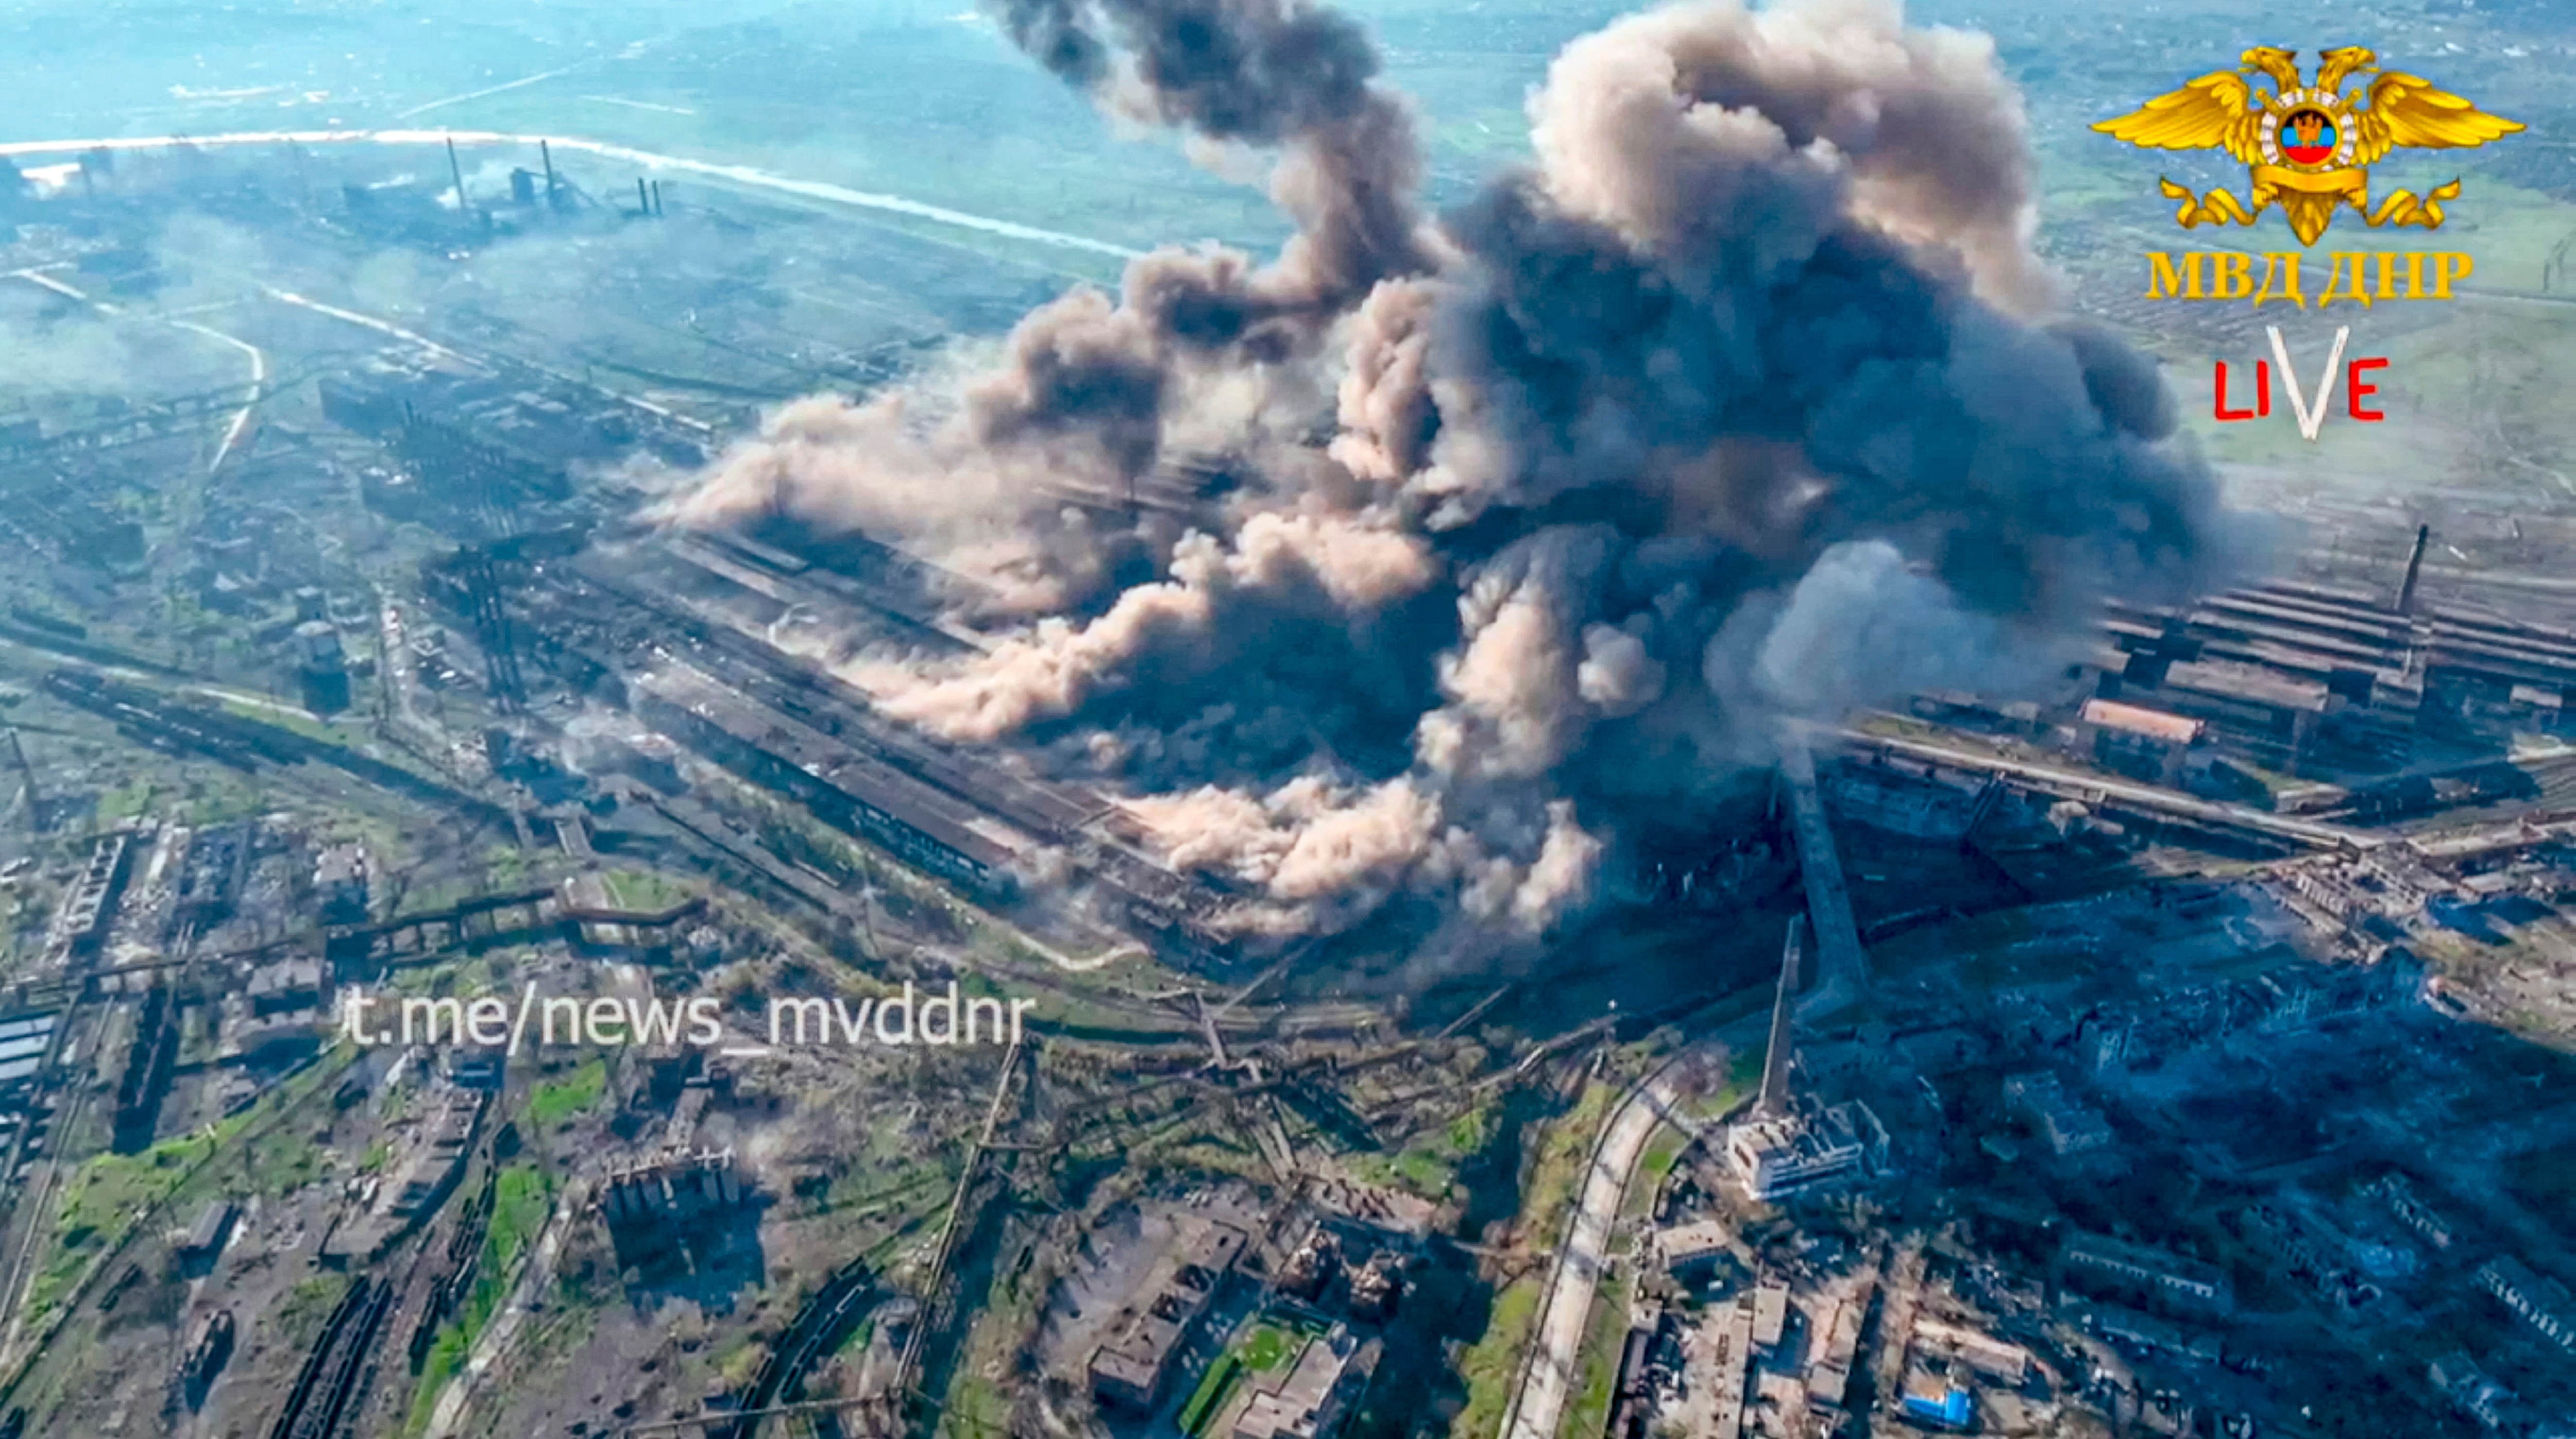 Battle for Azovstal steel plant rages, Ukrainian soldier warns Russia forces have reached the plant